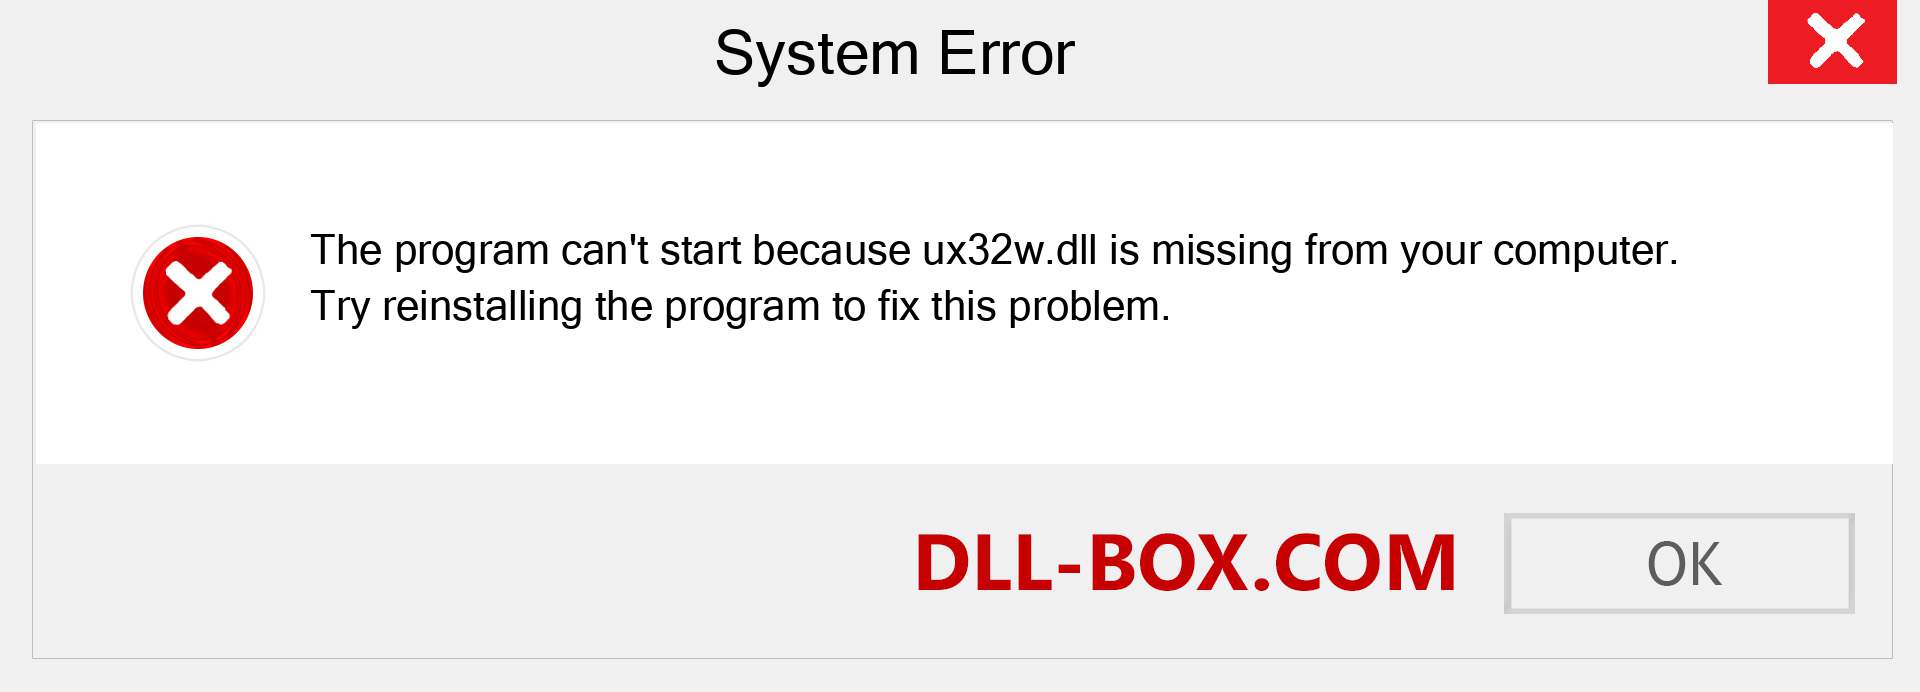  ux32w.dll file is missing?. Download for Windows 7, 8, 10 - Fix  ux32w dll Missing Error on Windows, photos, images